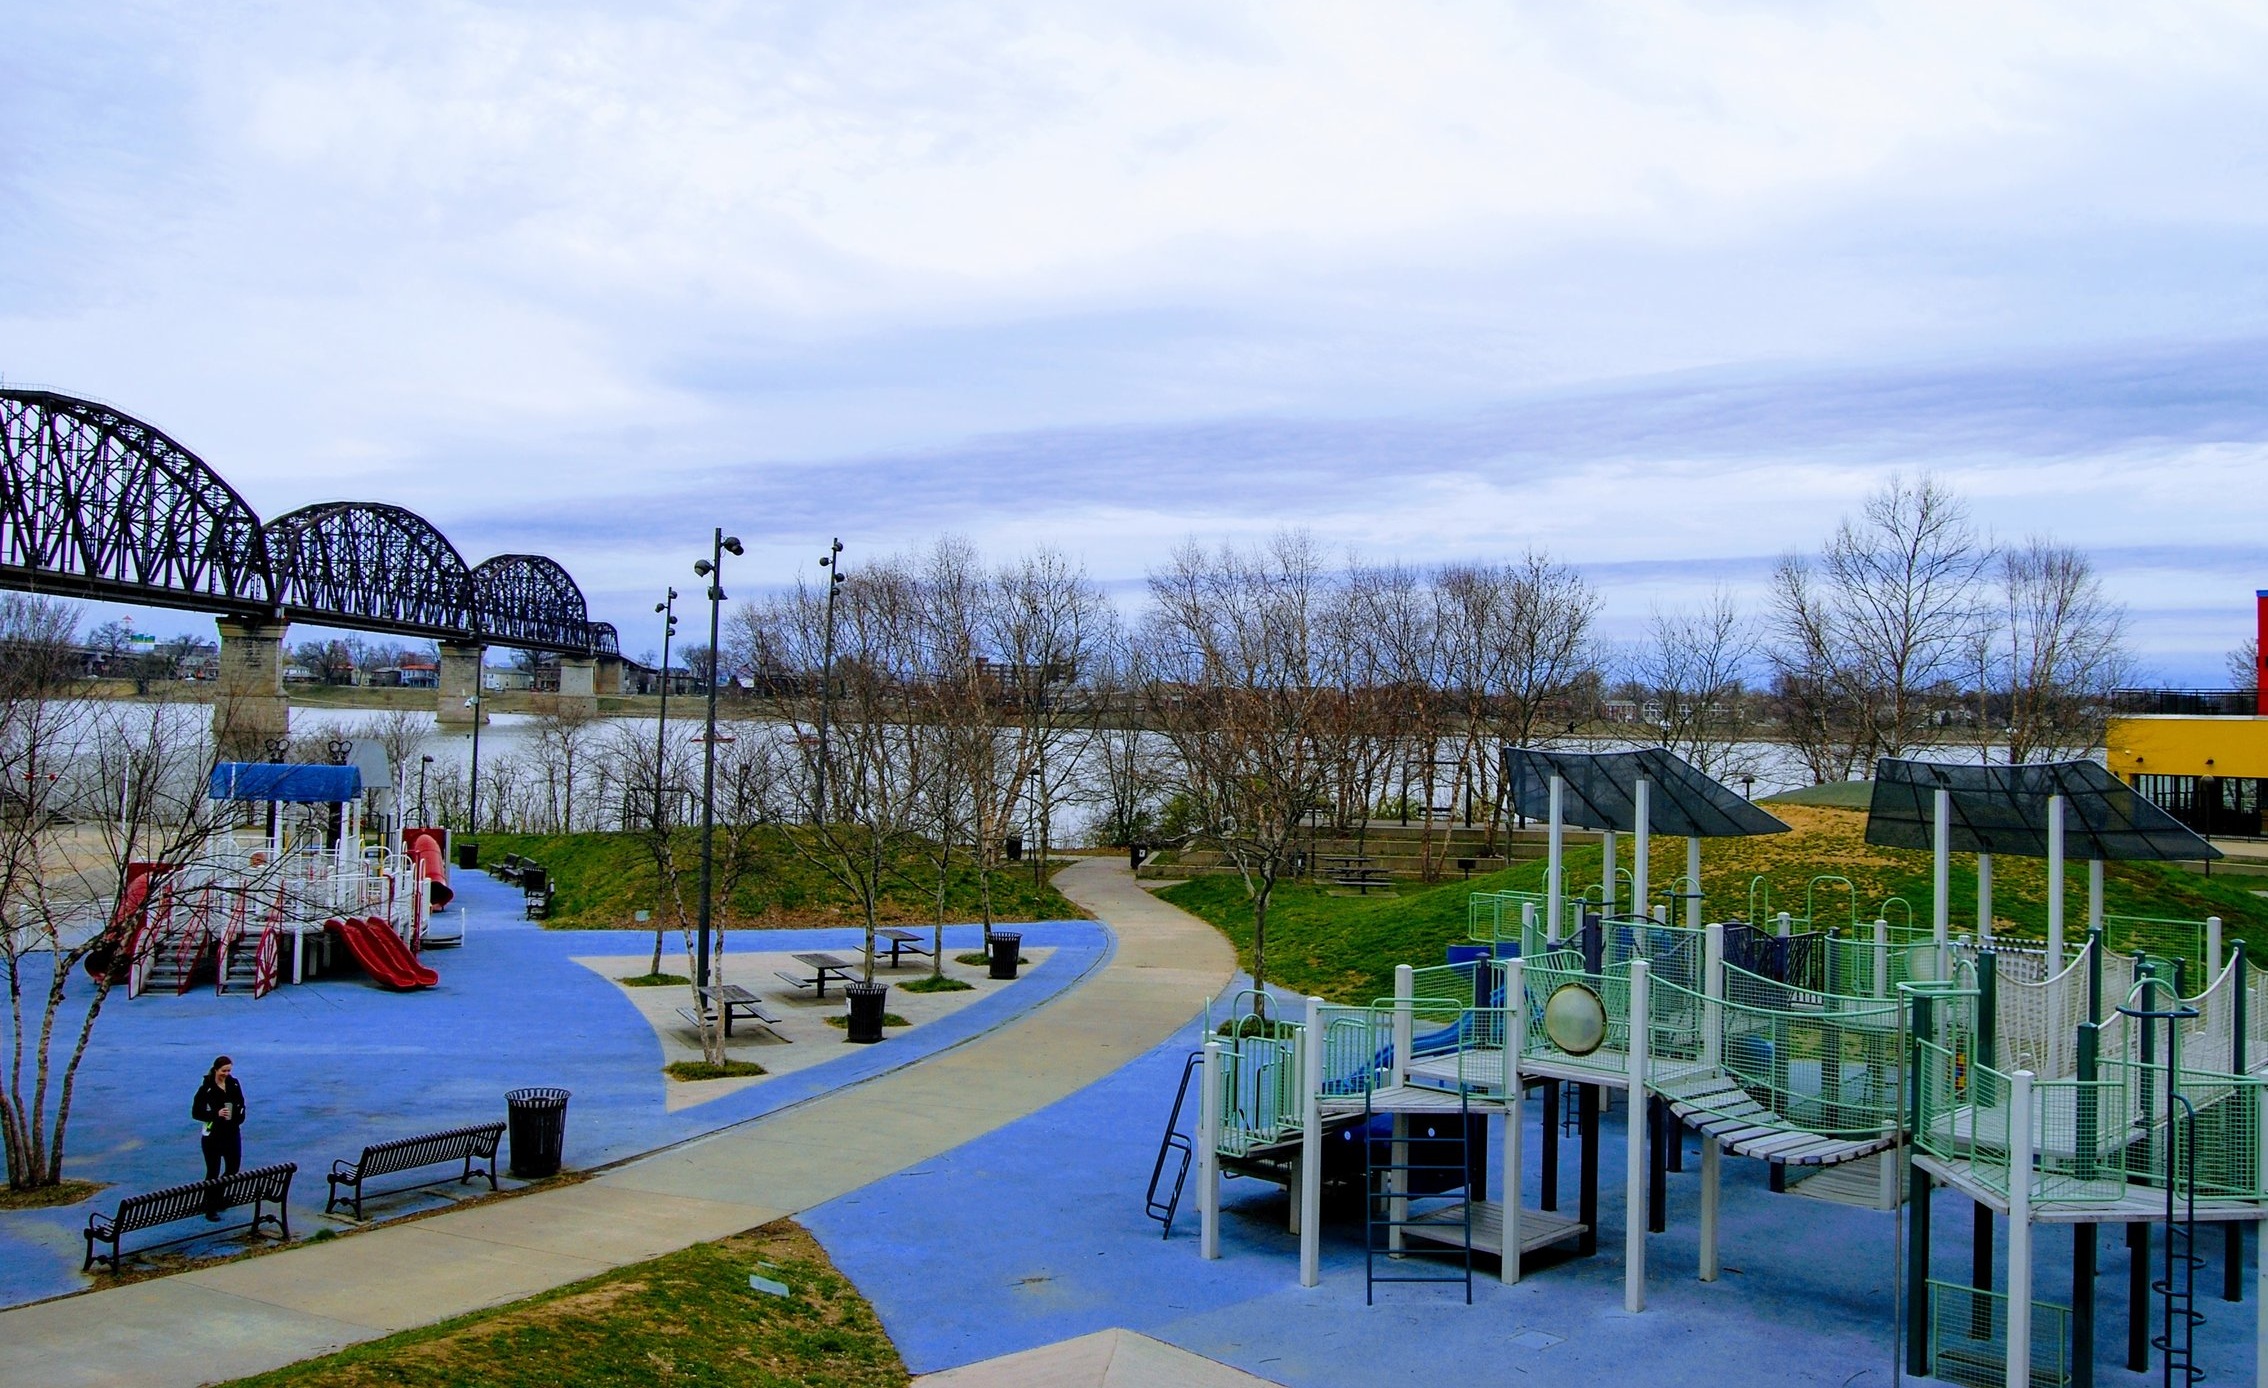 One of the playgrounds in Waterfront Park